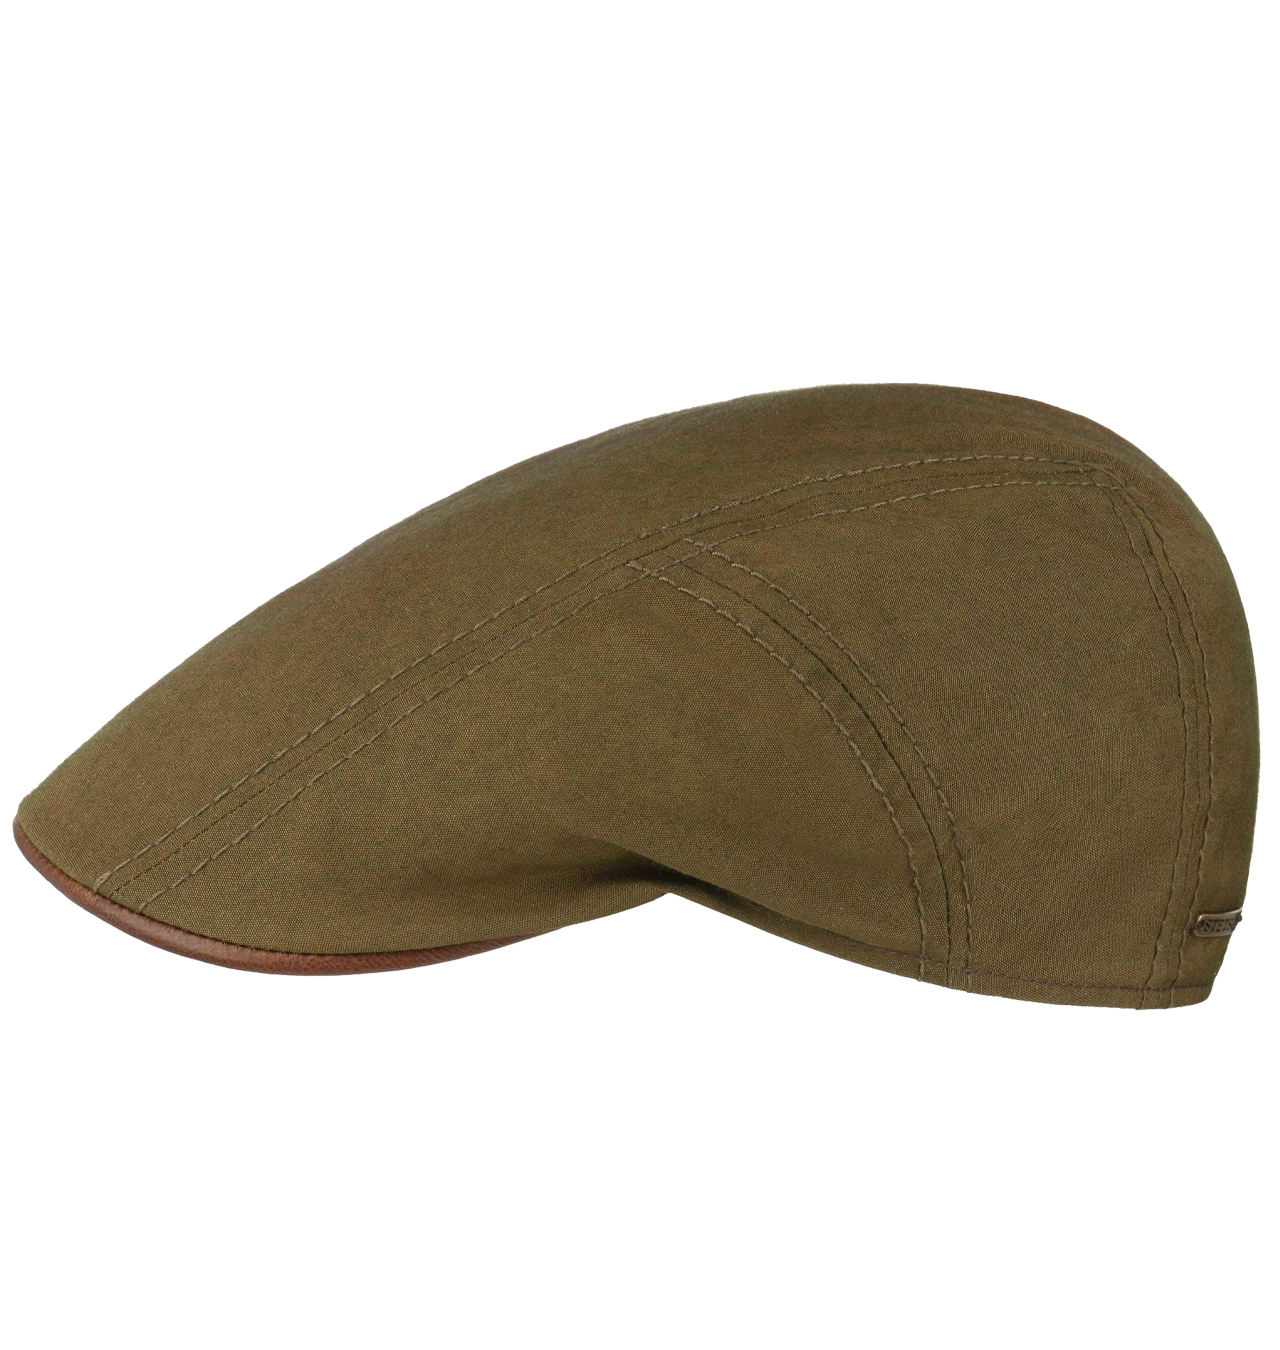 Stetson - Waxed Cotton Flat Cap - Olive